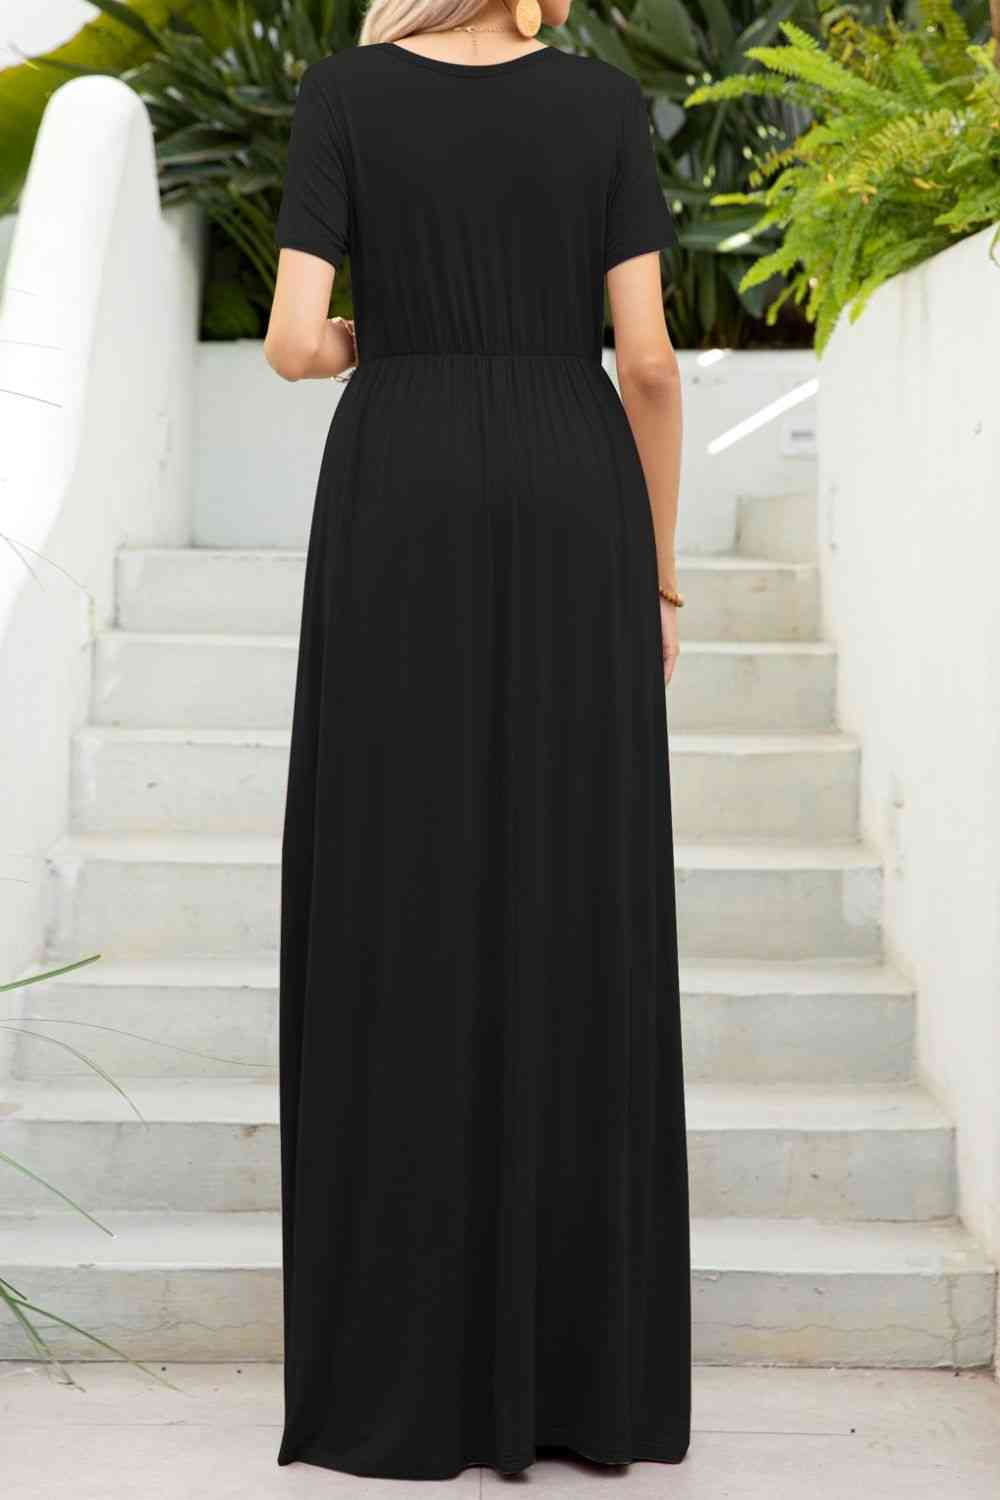 3 Colors - Round Neck Maxi Tee Dress with Pockets - Sizes S-2XL Ti Amo I love you